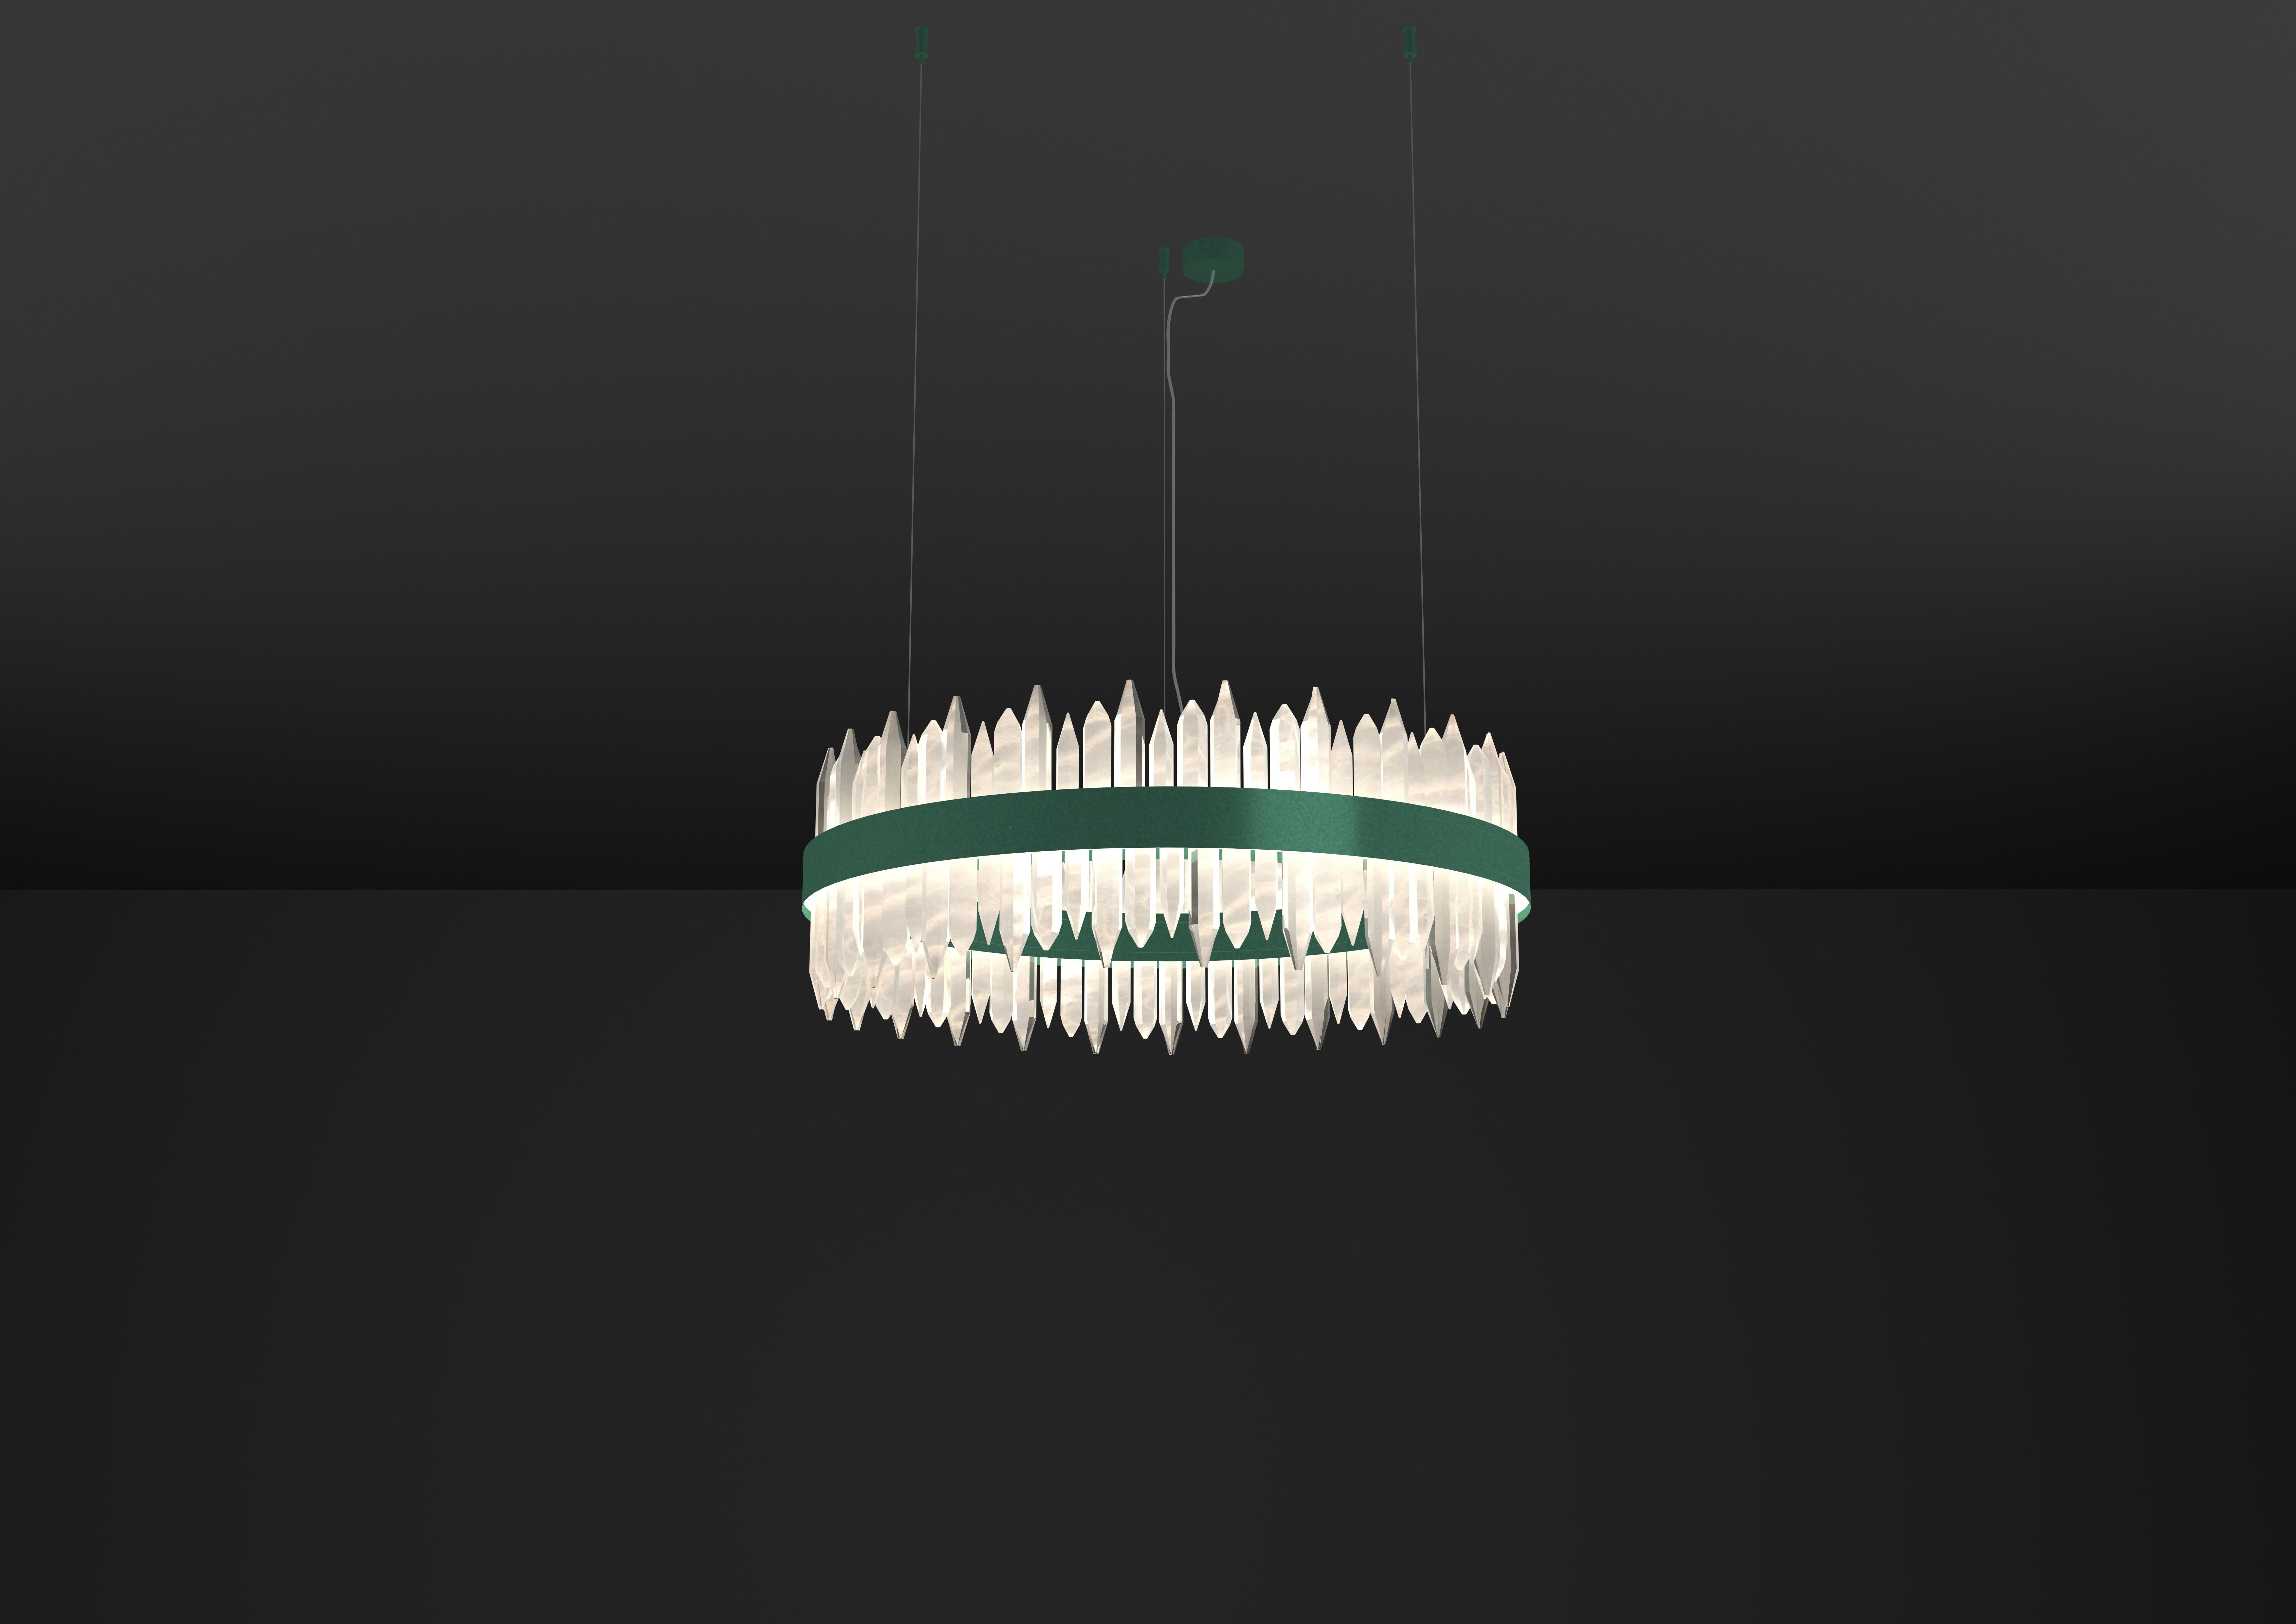 Urano Freedom Green 100 Pendant Light 2 by Alabastro Italiano
Dimensions: Ø 100 x H 34 cm.
Materials: Glass and freedom green metal.

Available in different sizes: Ø 60, Ø 80, Ø 100 and Ø 120 cm. 
Available in different finishes: Shiny Silver,